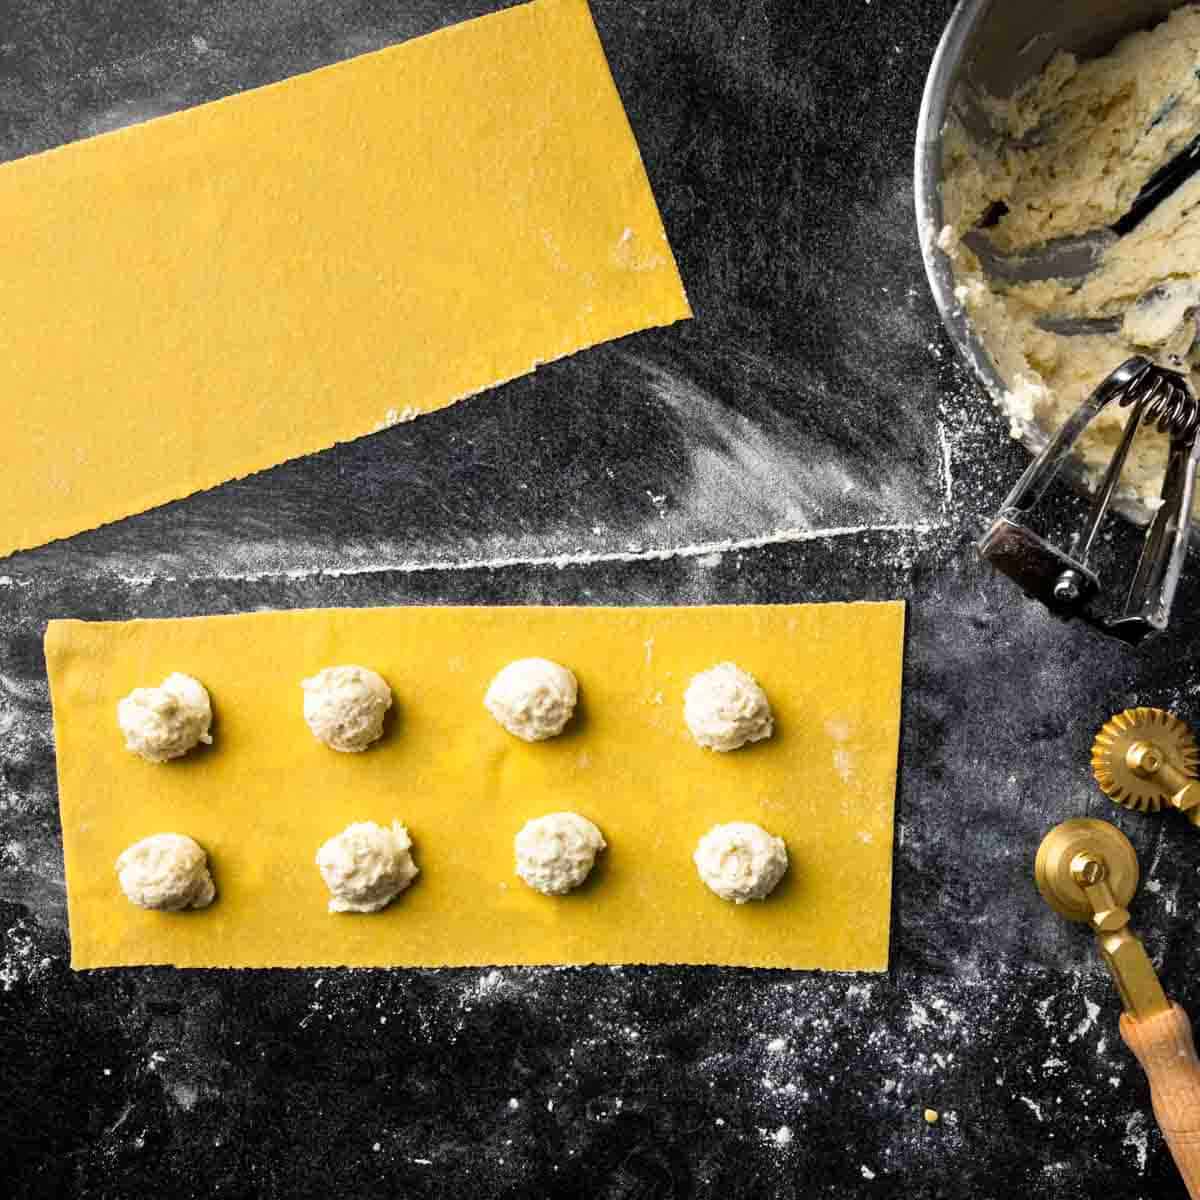 Scoops of pasta filling on a sheet of fresh pasta dough.